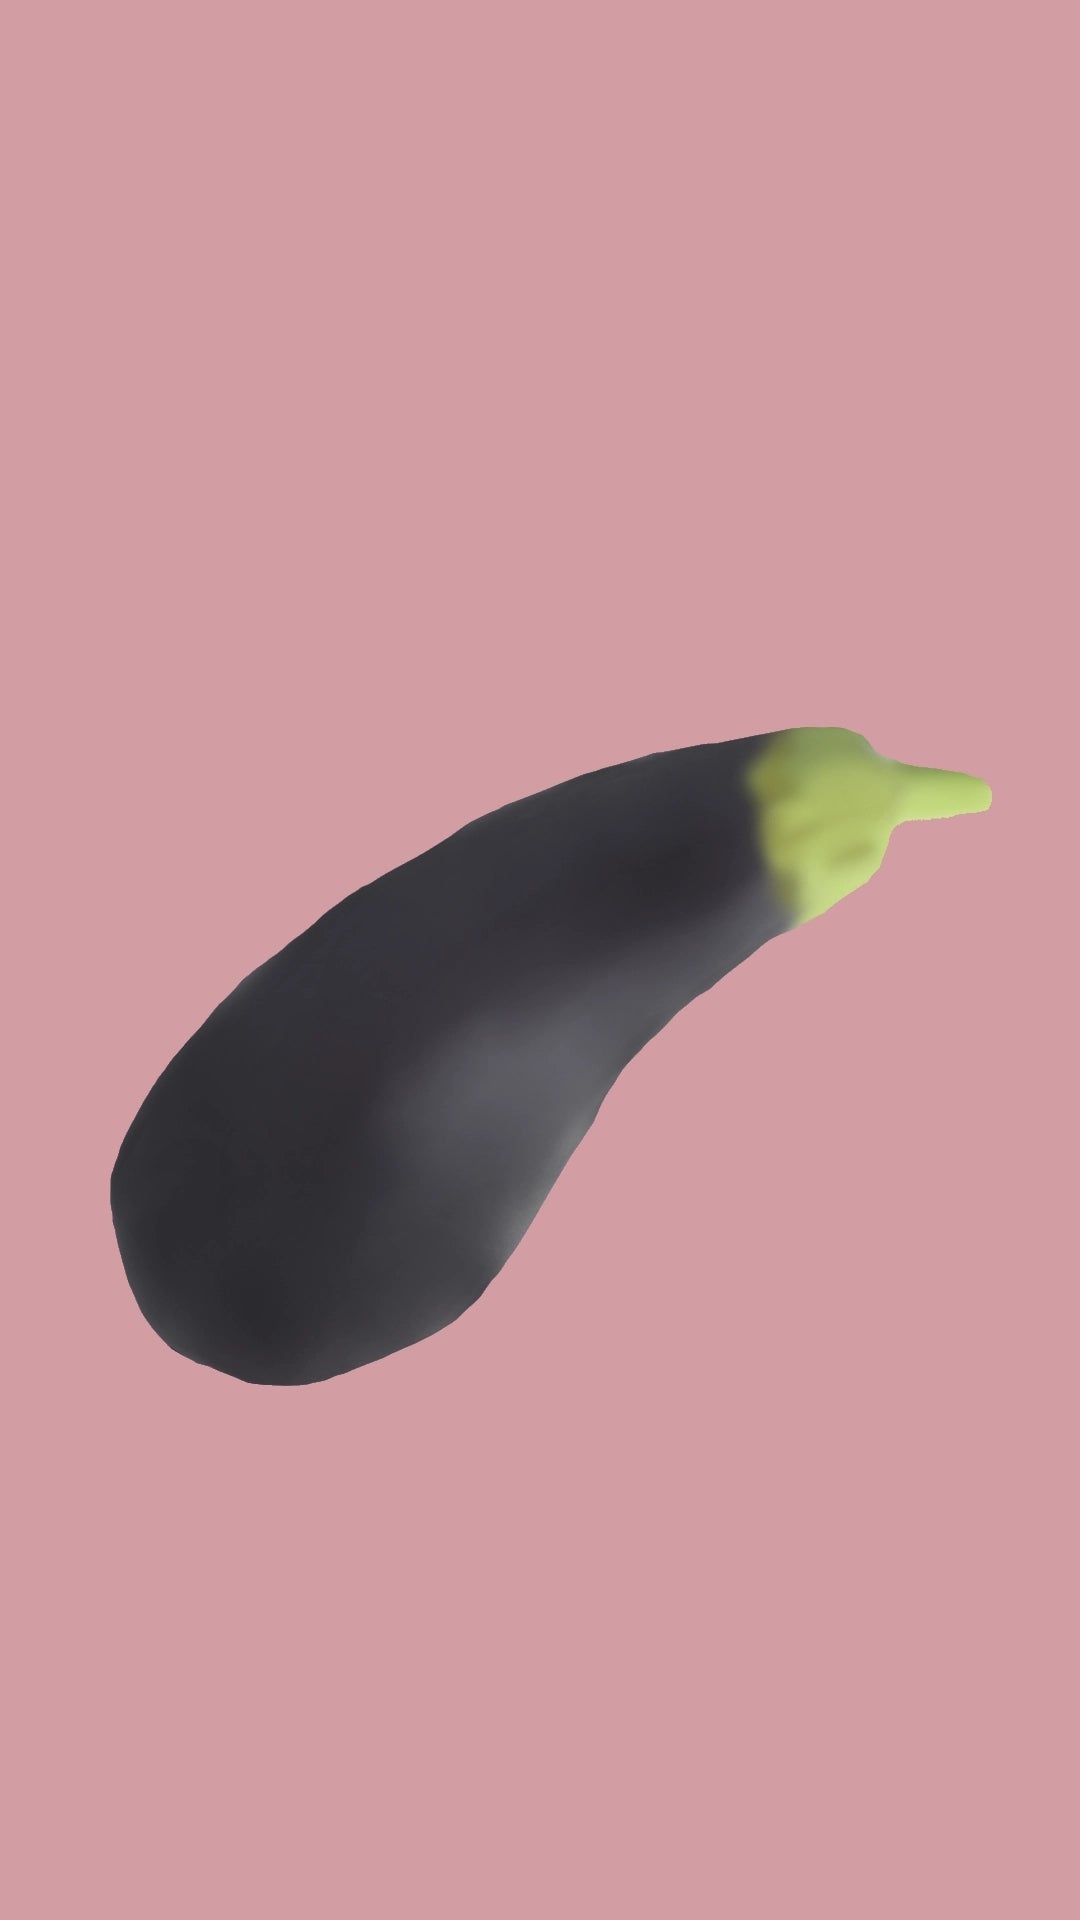 I will post this drawing of an eggplant everyday until it's ft in a reddit video or he eats an eggplant: JackSucksAtLife